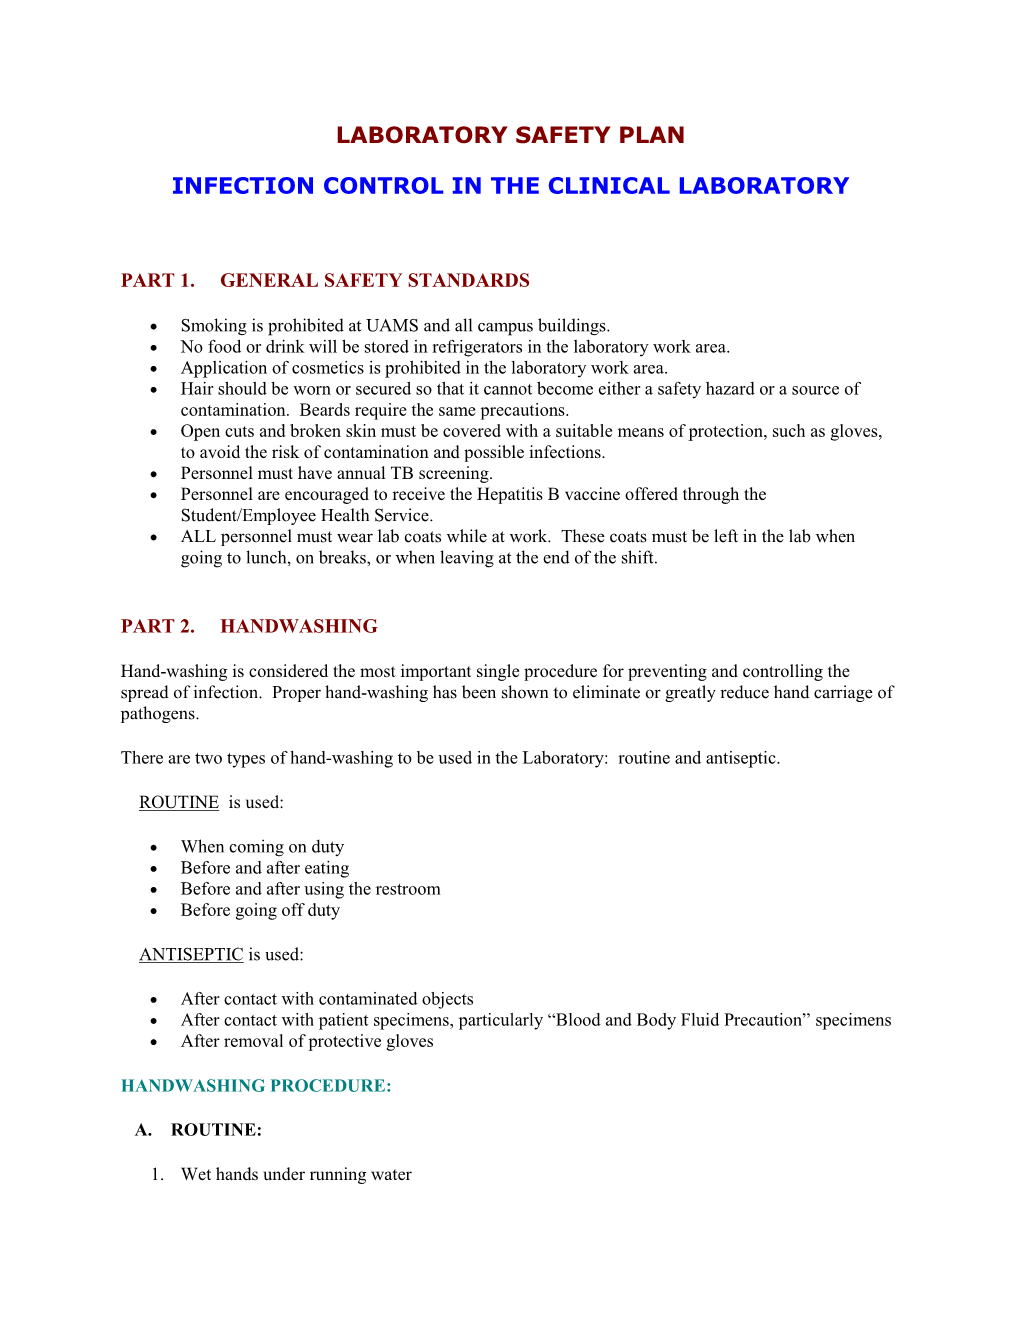 Laboratory Safety Plan Infection Control